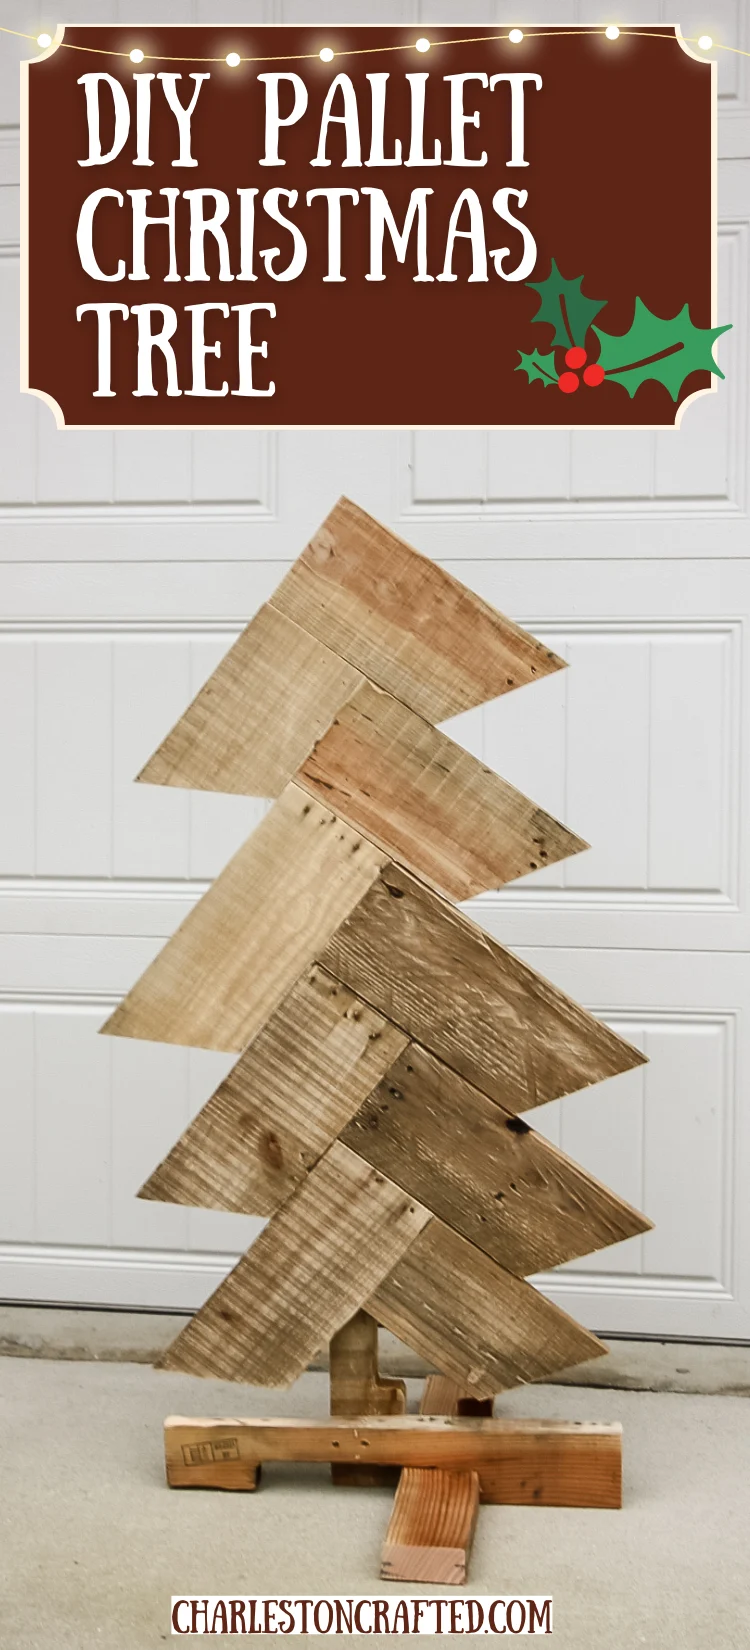 How to make a pallet Christmas tree - Charleston Crafted